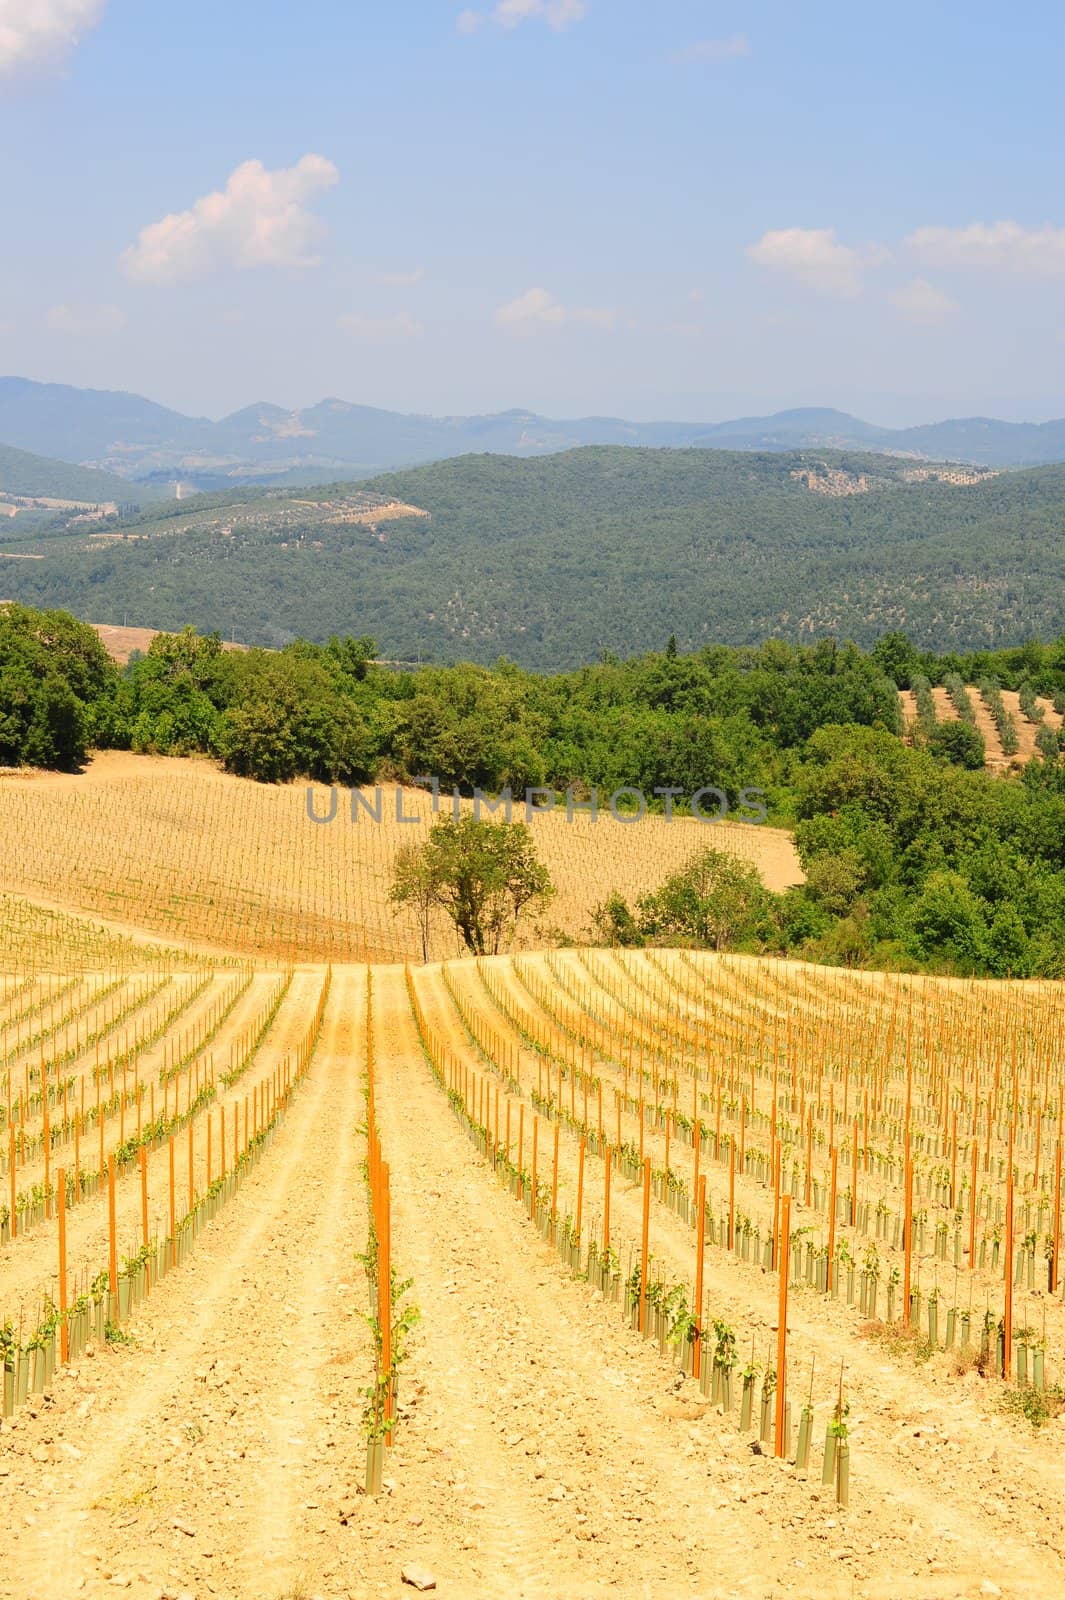 Hill Of Tuscany With Young Vineyard In The Chianti Region